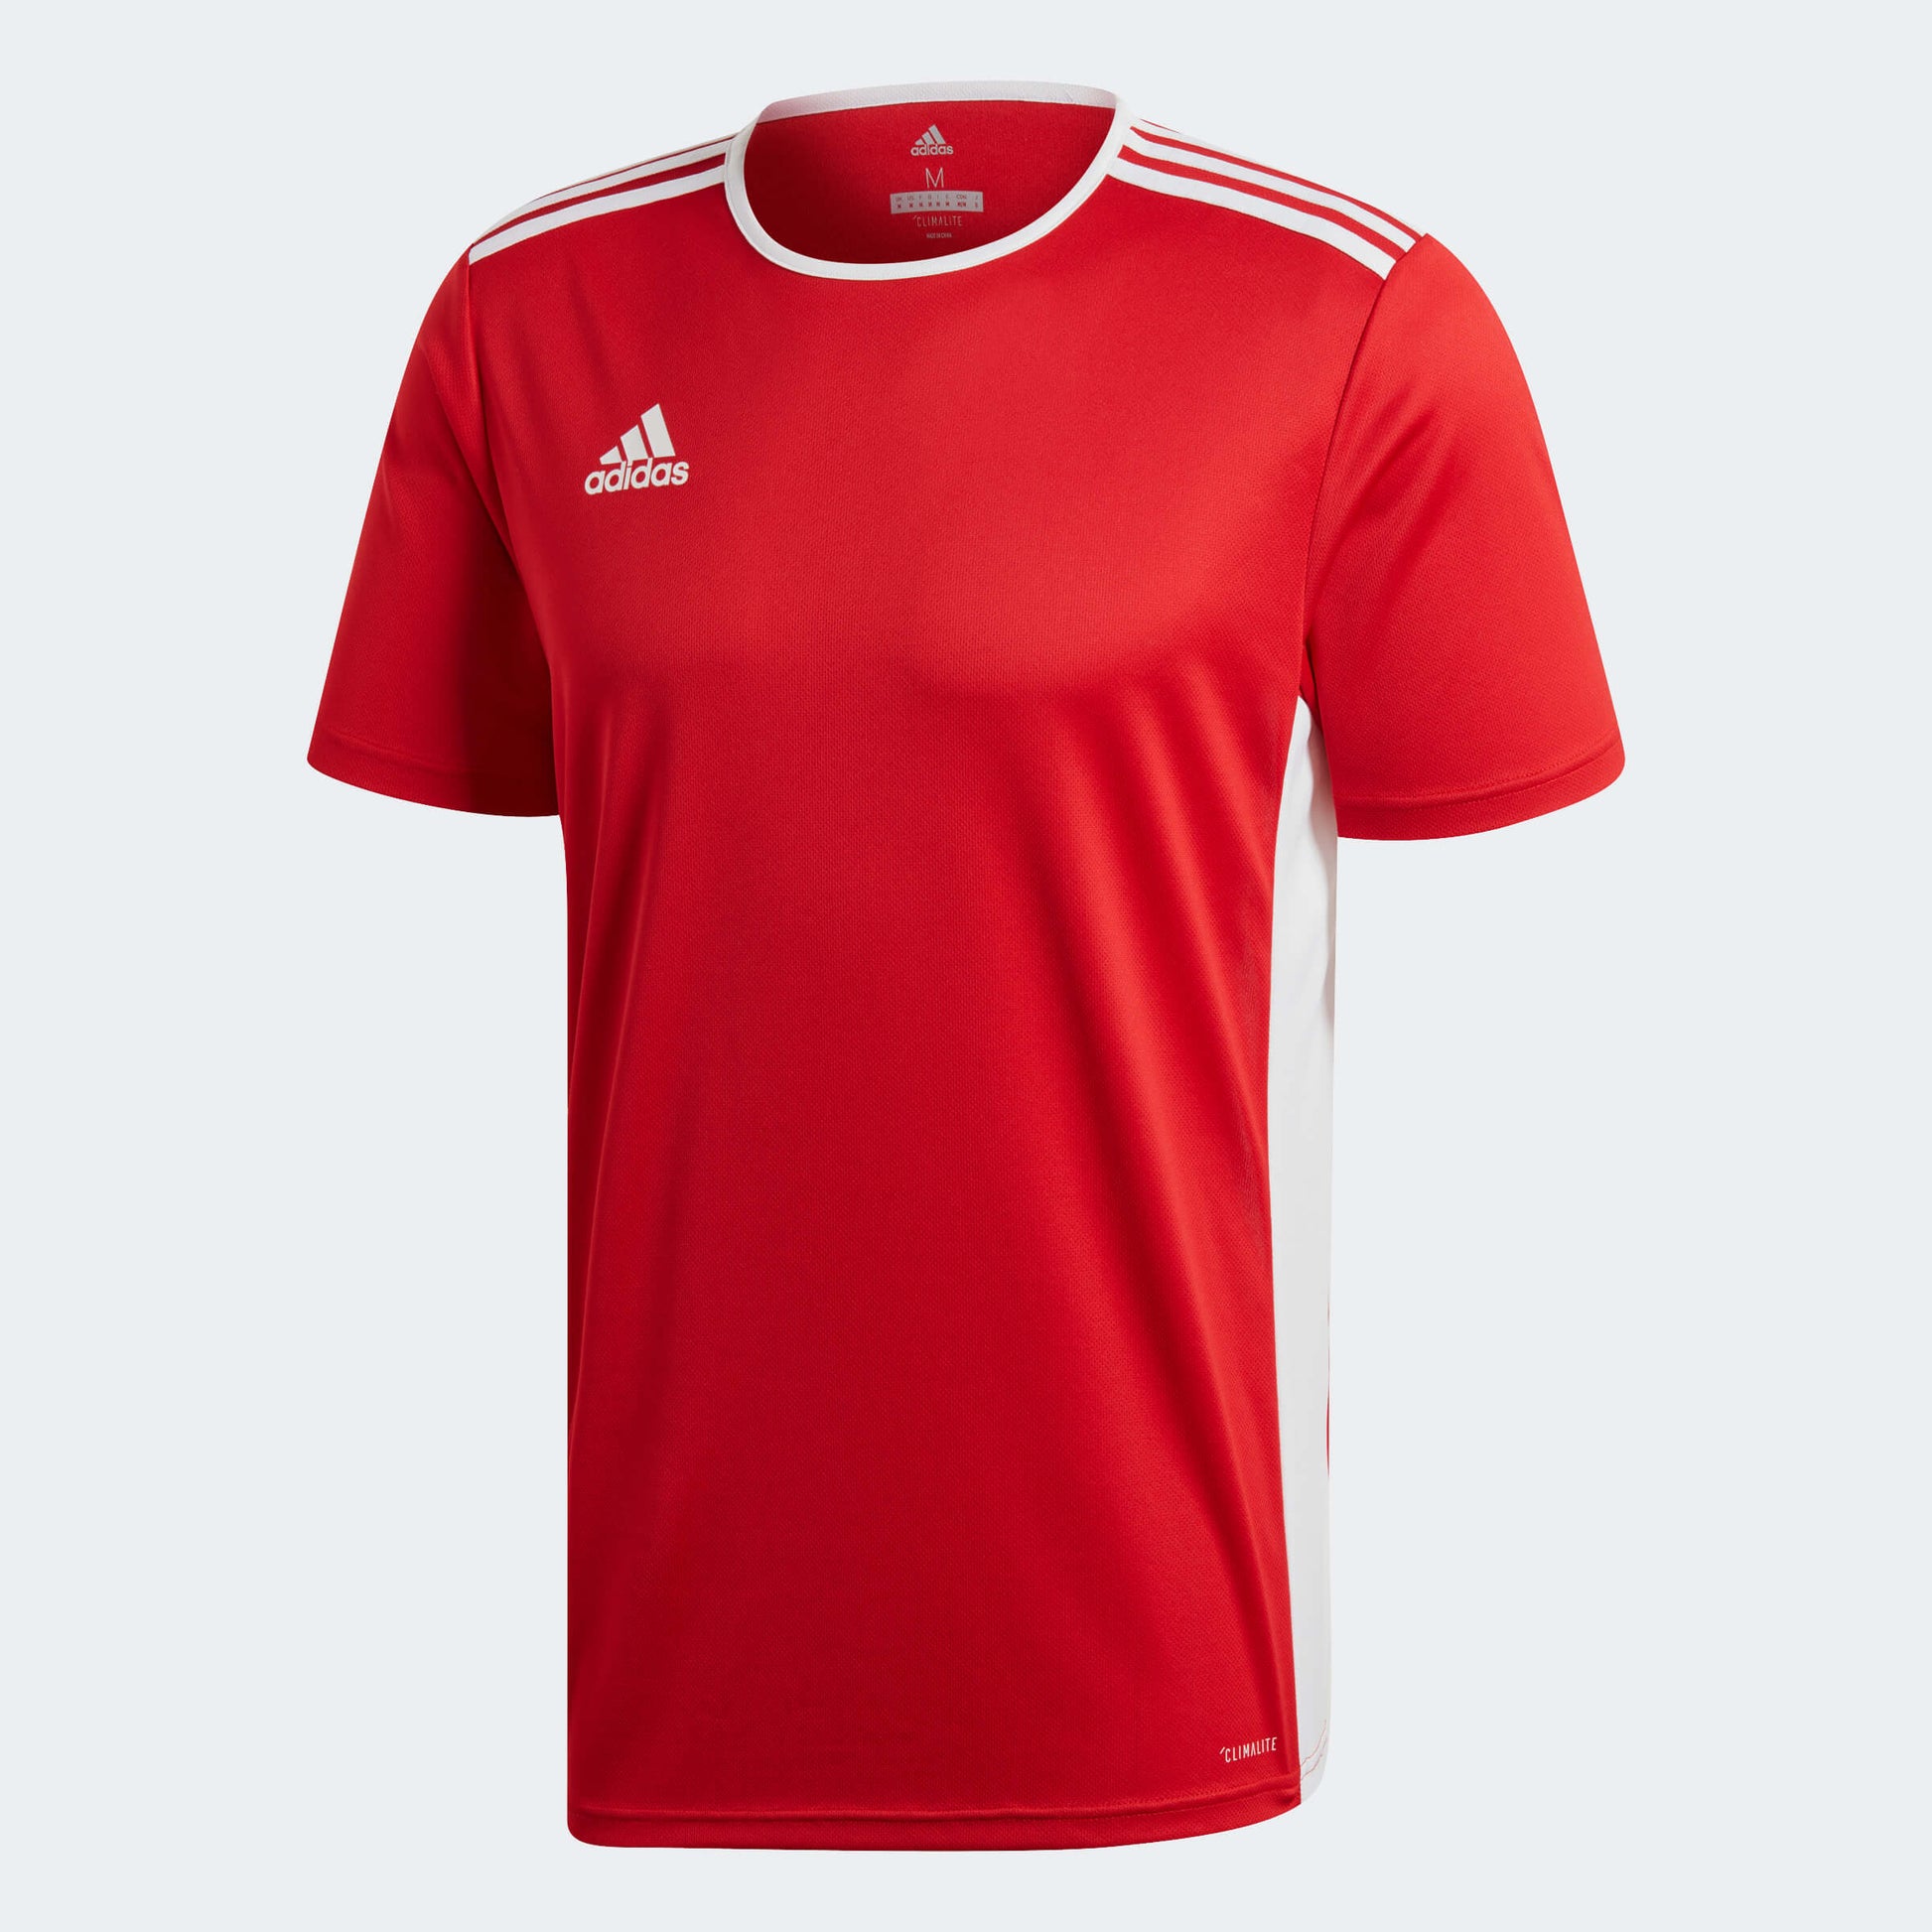 adidas Entrada 18 Jersey Red-White (Front)